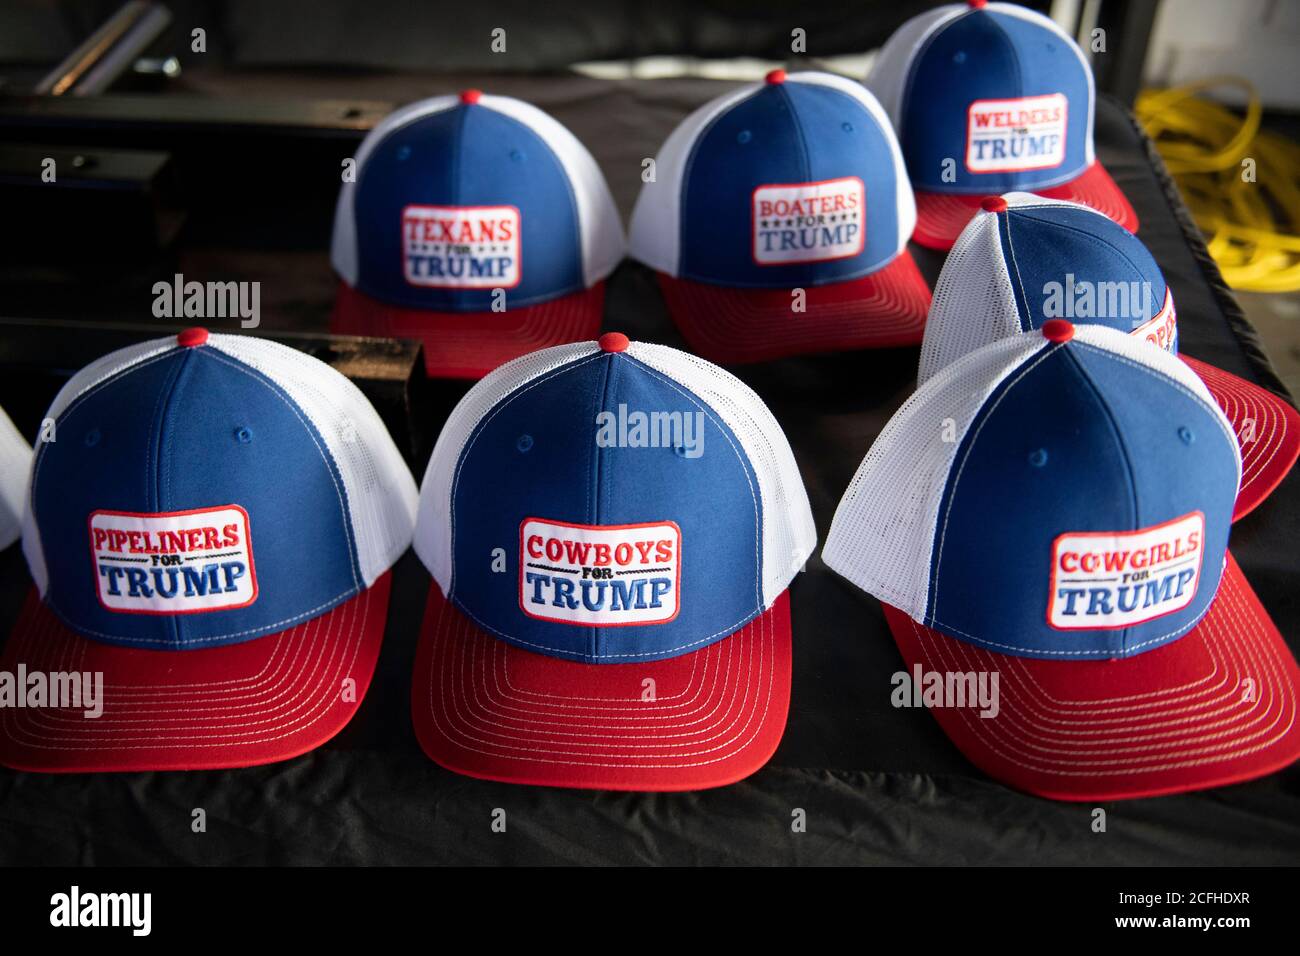 Lakeway, Texas USA Sept. 5, 2020: Novelty pro-Trump hats on sale at a mariner at the starting point of a boat parade supporting the U.S. president that attracted hundreds of watercraft of all sizes. The hats read 'Boaters for Trump' and 'Cowboys for Trump.' Several boats capsized in the huge wakes from hundreds of boats but no injuries were reported. Credit: Bob Daemmrich/Alamy Live News Stock Photo